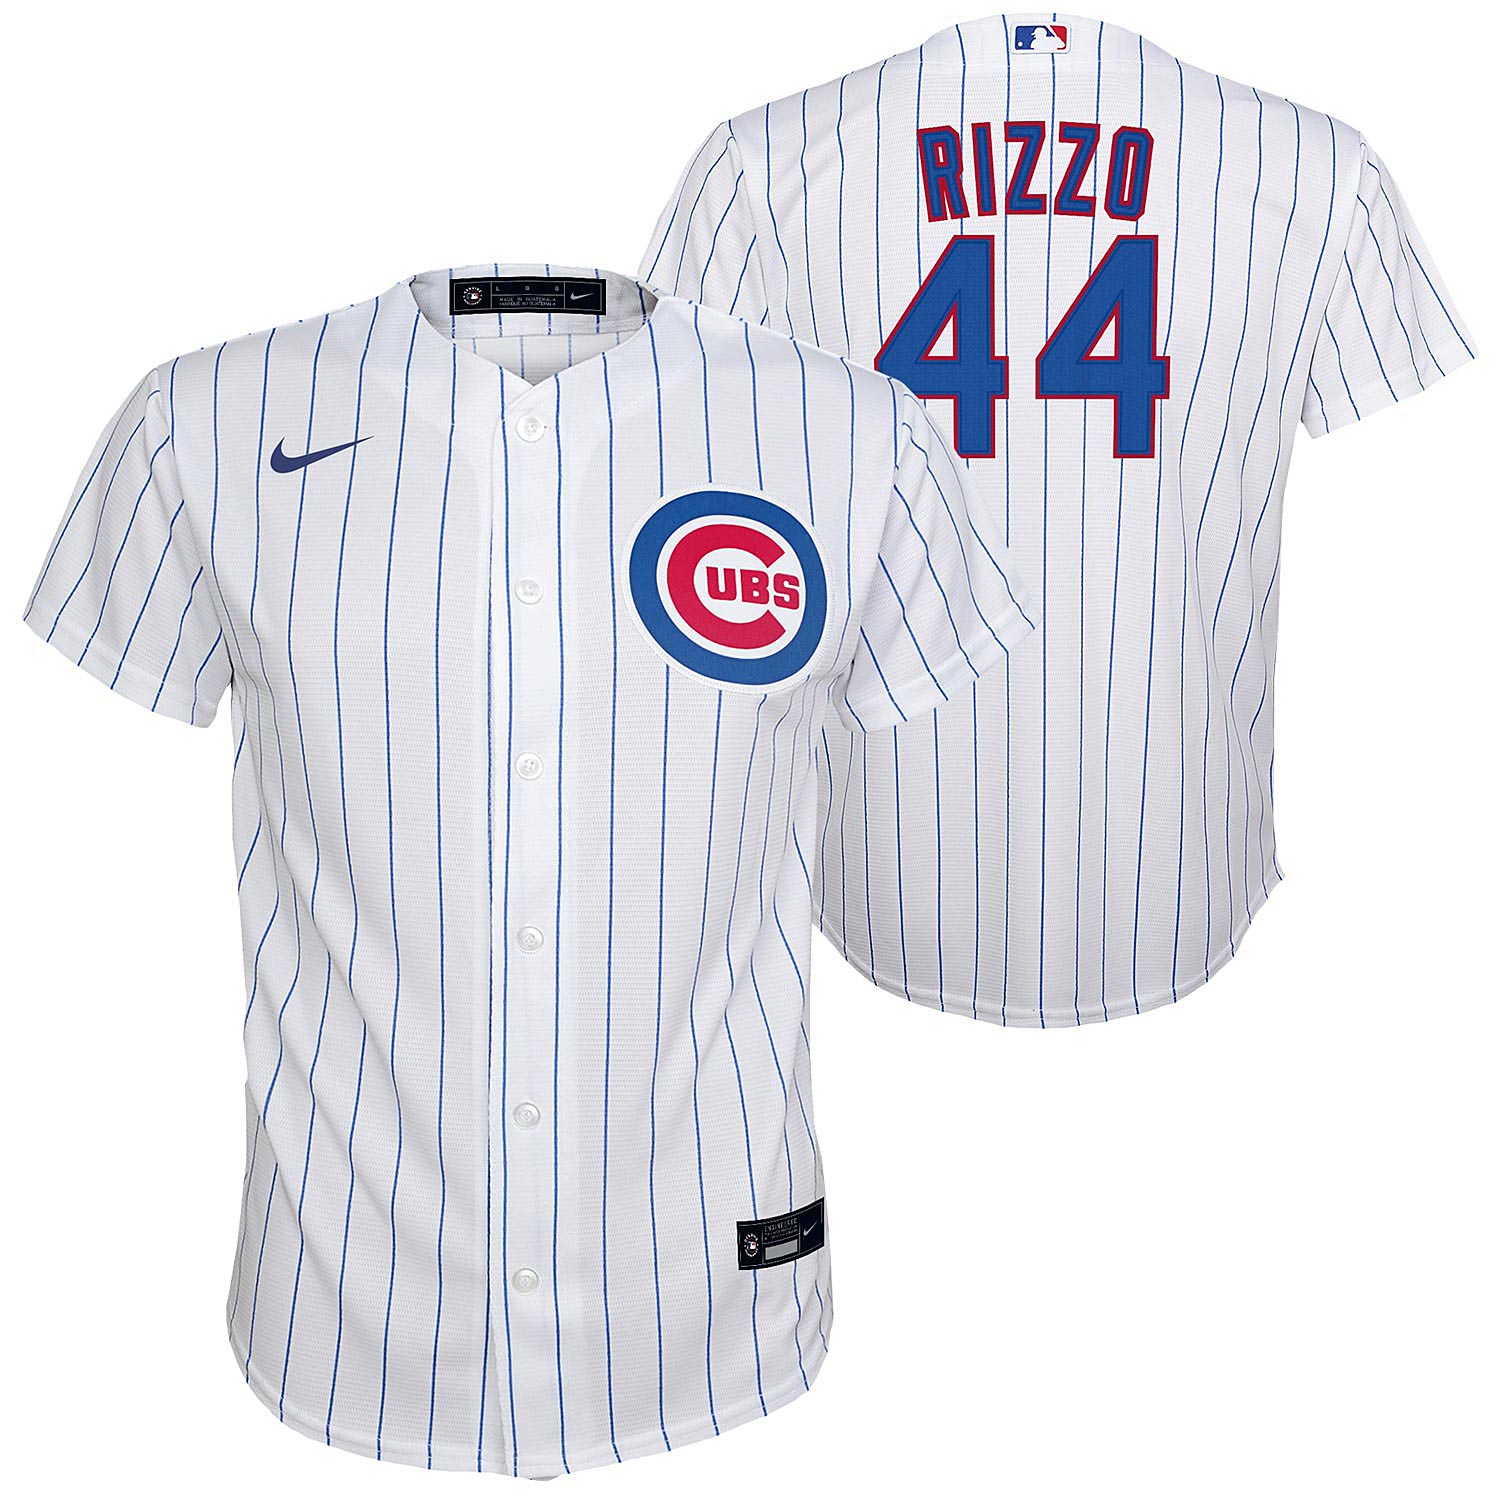 Chicago Cubs Anthony Rizzo Youth Nike Home Twill Player Finished Replica Jersey with Authentic Lettering Small = 6-8